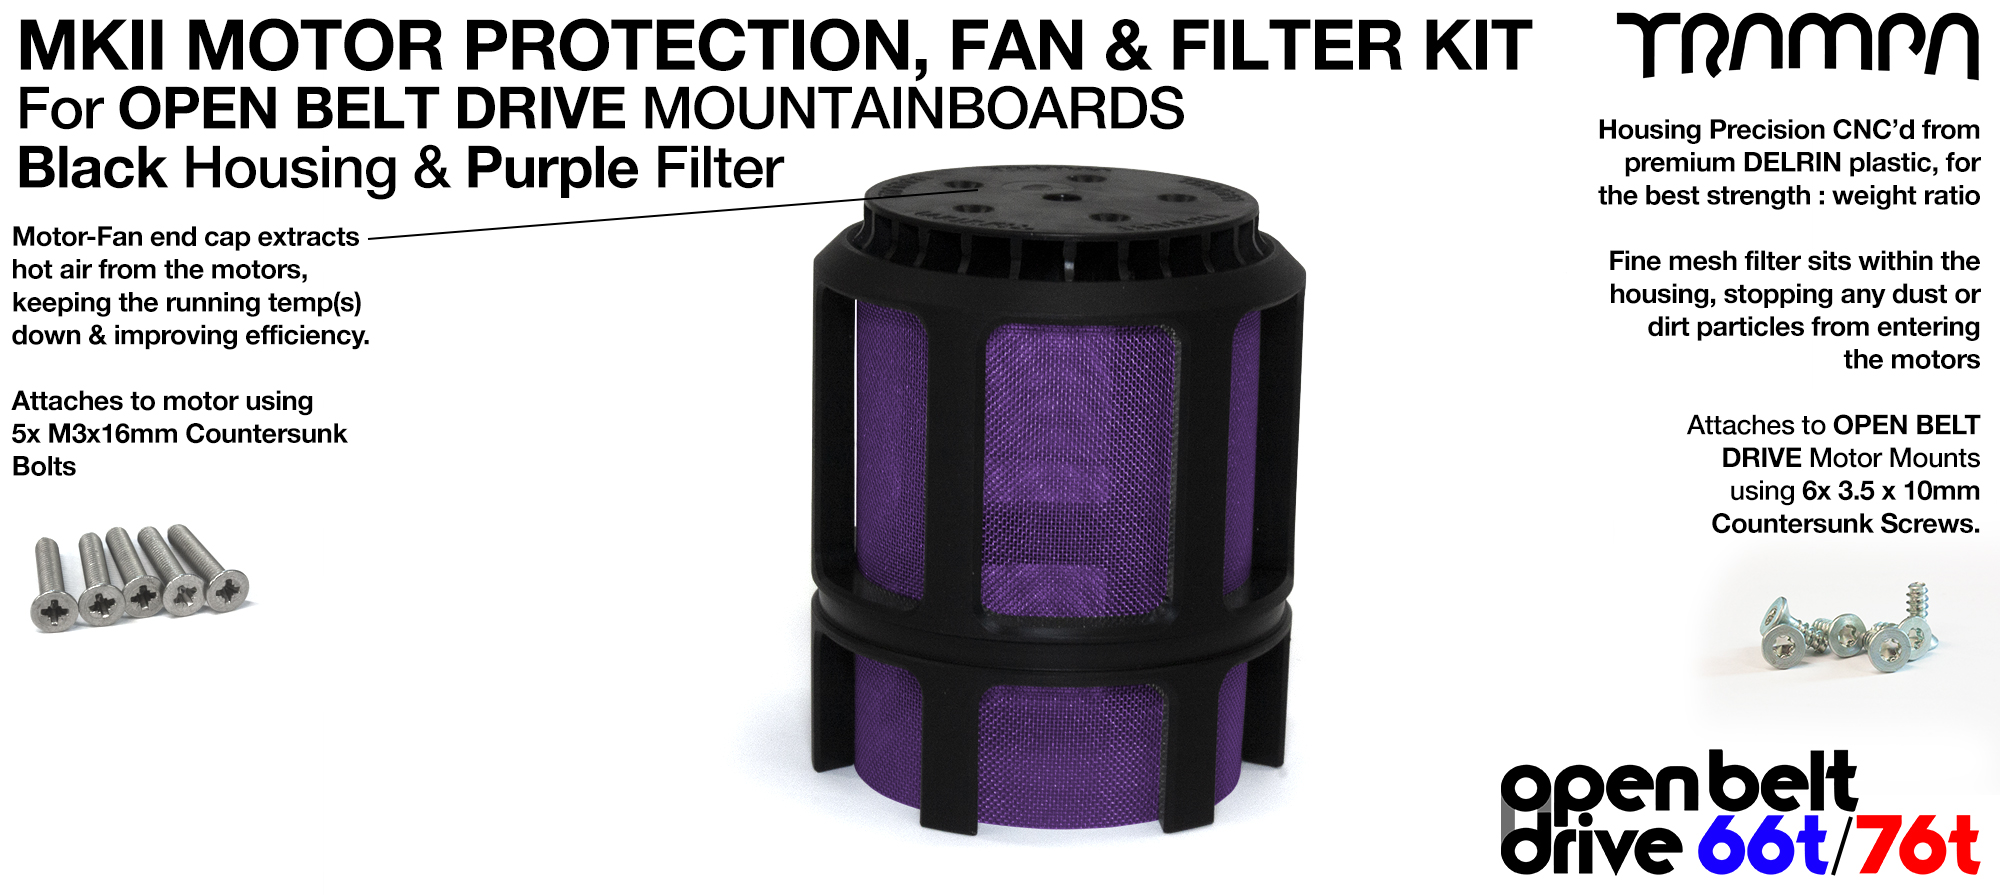 FULL CAGE Motor protection SUPER STRONG DELRIN Plastic includes Fan & PURPLE Filter - SINGLE